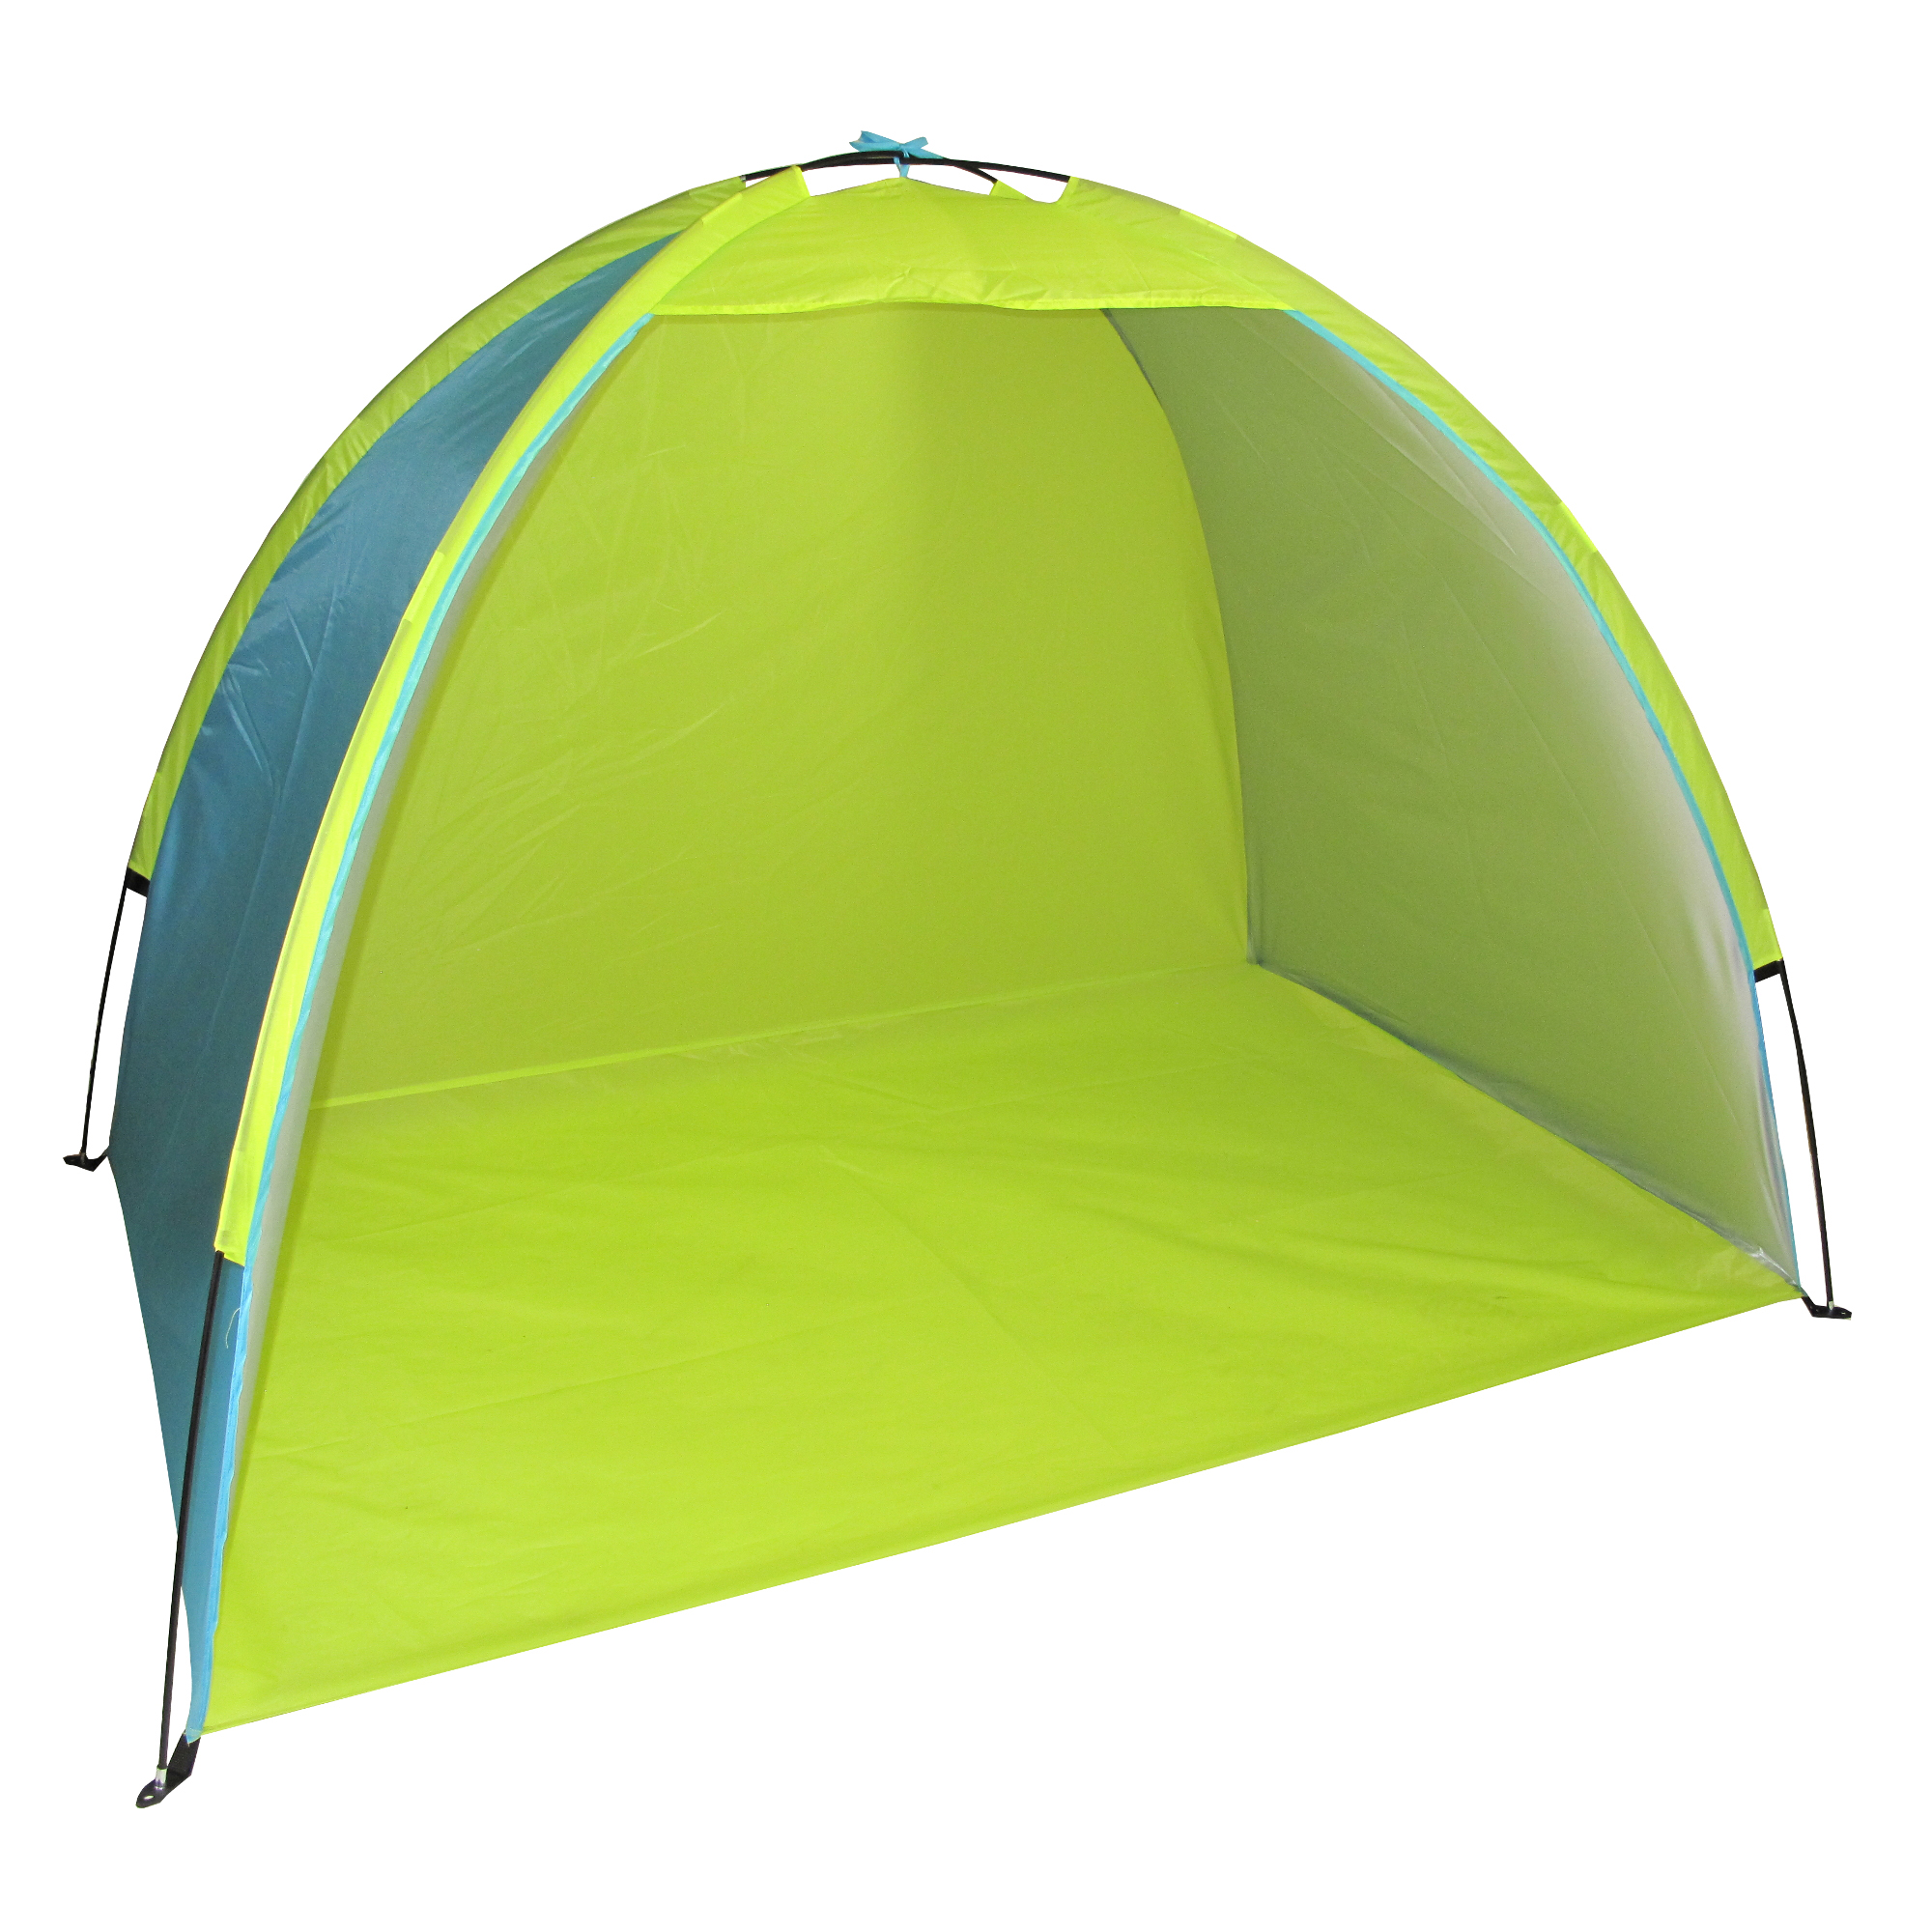 BEACH Baby Family Size Super Shade Dome